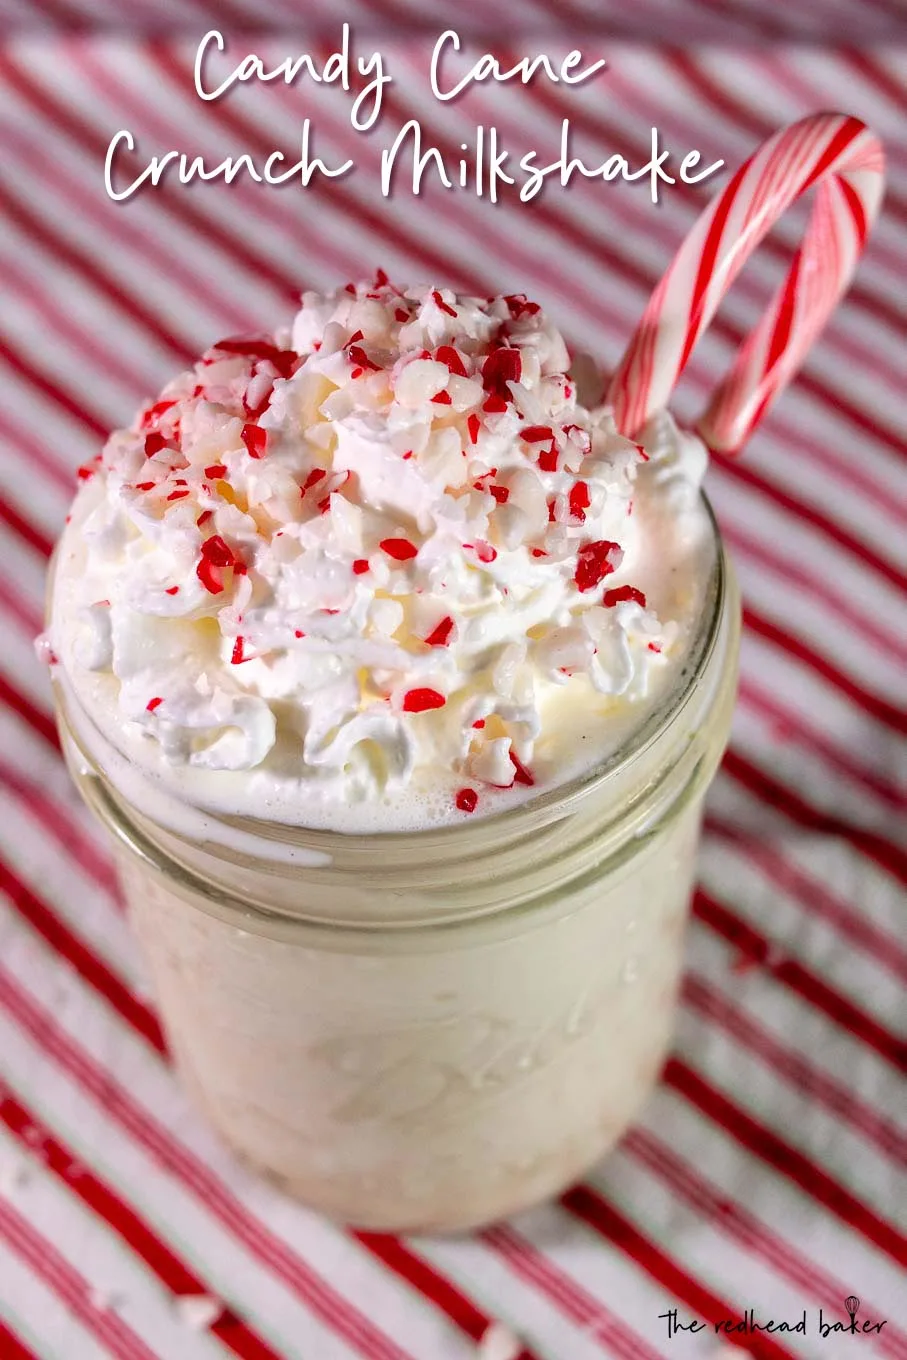 A candy cane crunch martini garnished with whipped cream, crushed candy canes and one whole candy cane